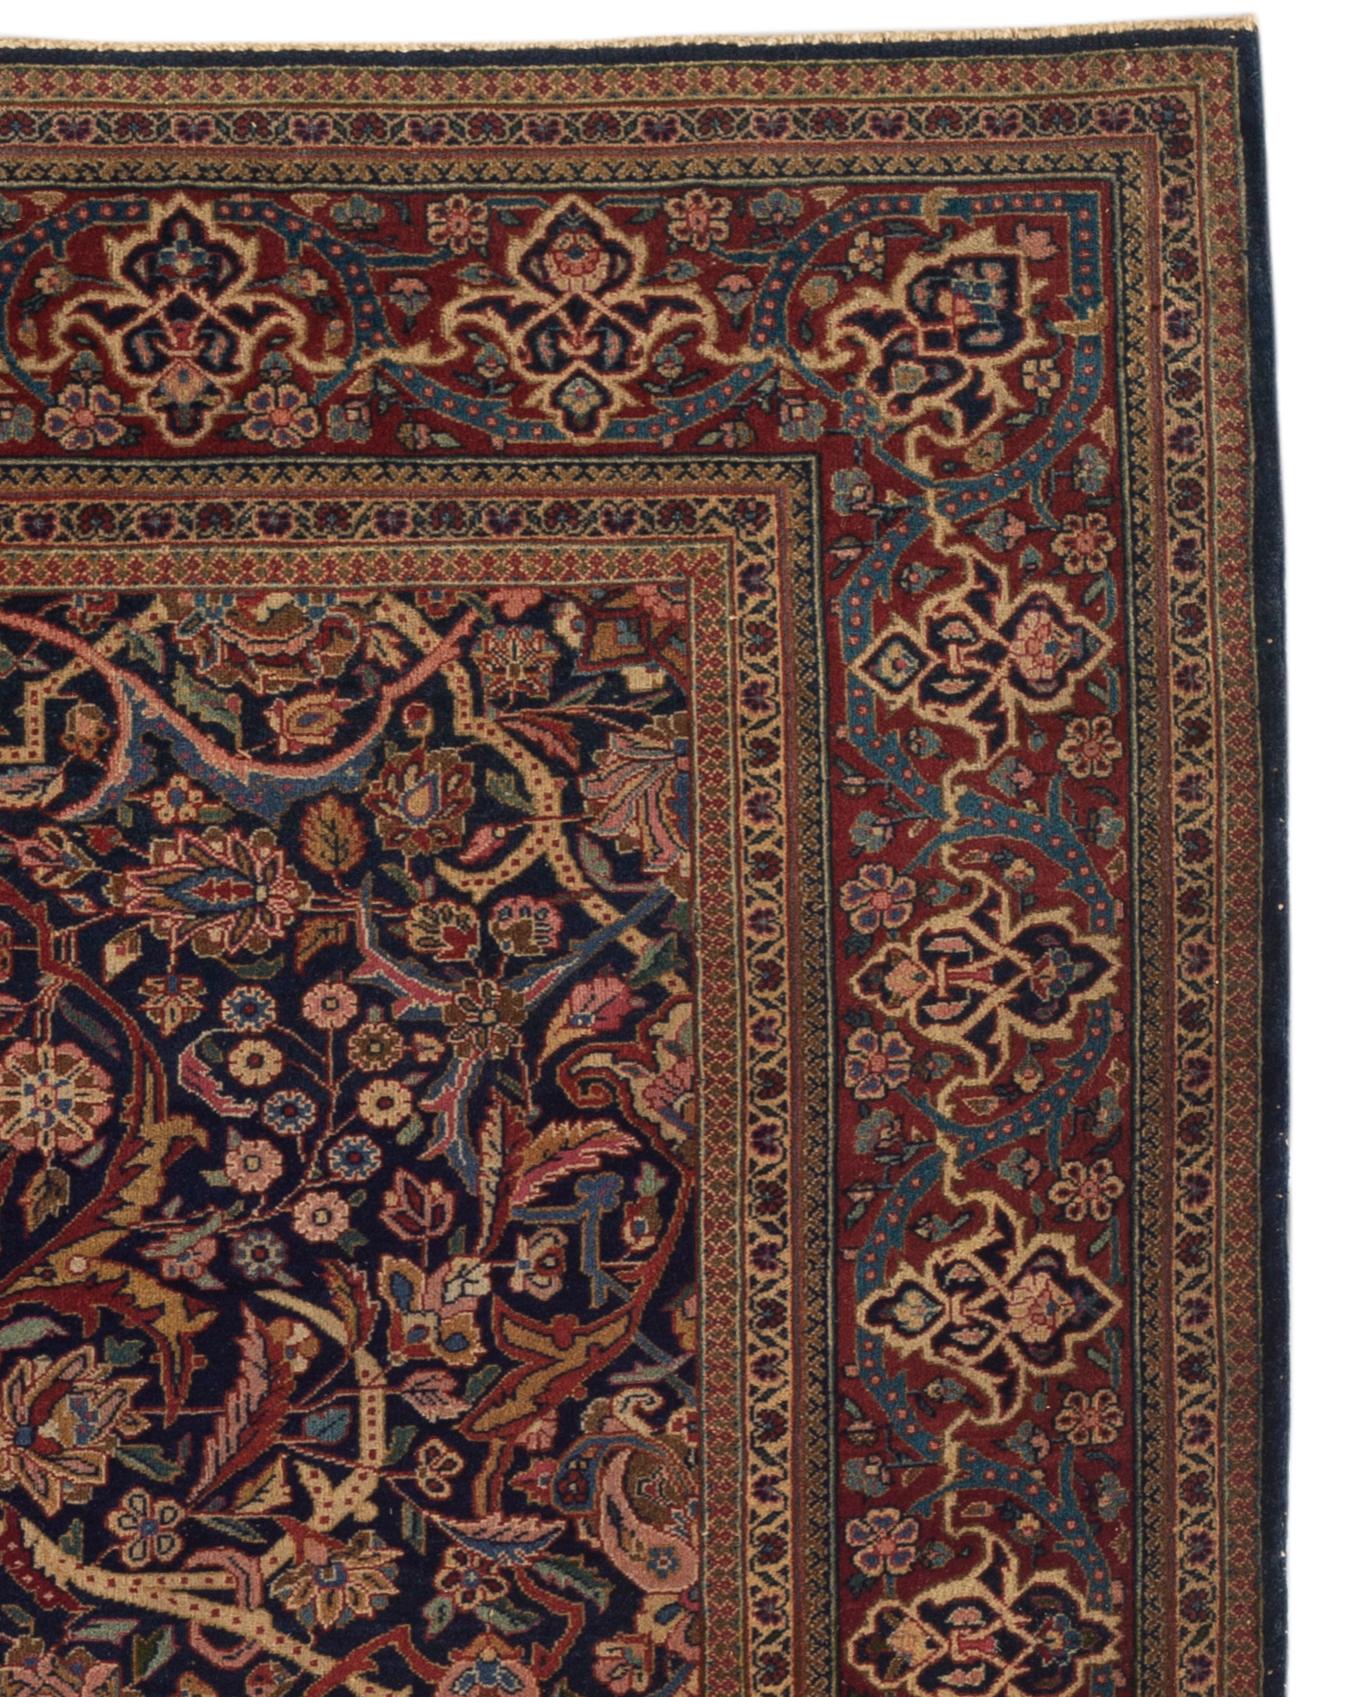 Hand-Woven Traditional Handwoven Luxury Antique Persian Kashan Navy / Red Rug, circa 1900 For Sale